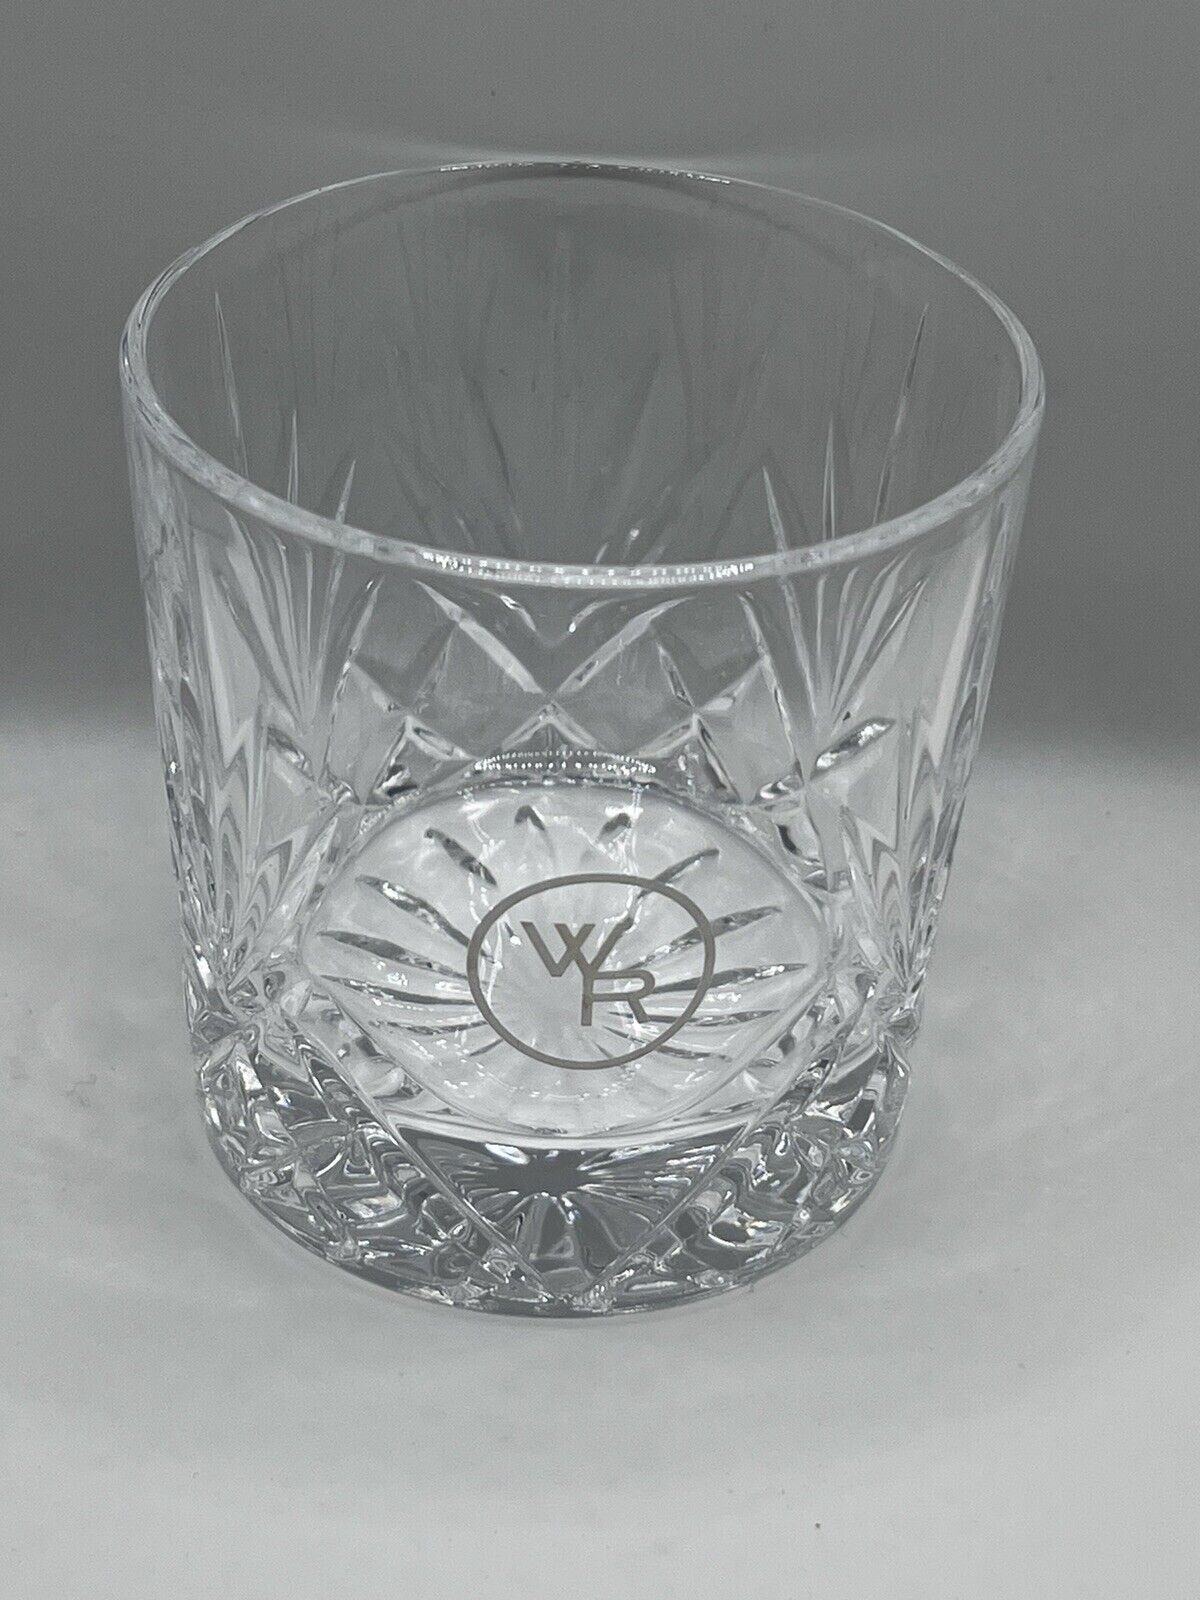 Woodford Reserve WR Bourbon Whisky Rock Glass Crystal Lowball 8 oz